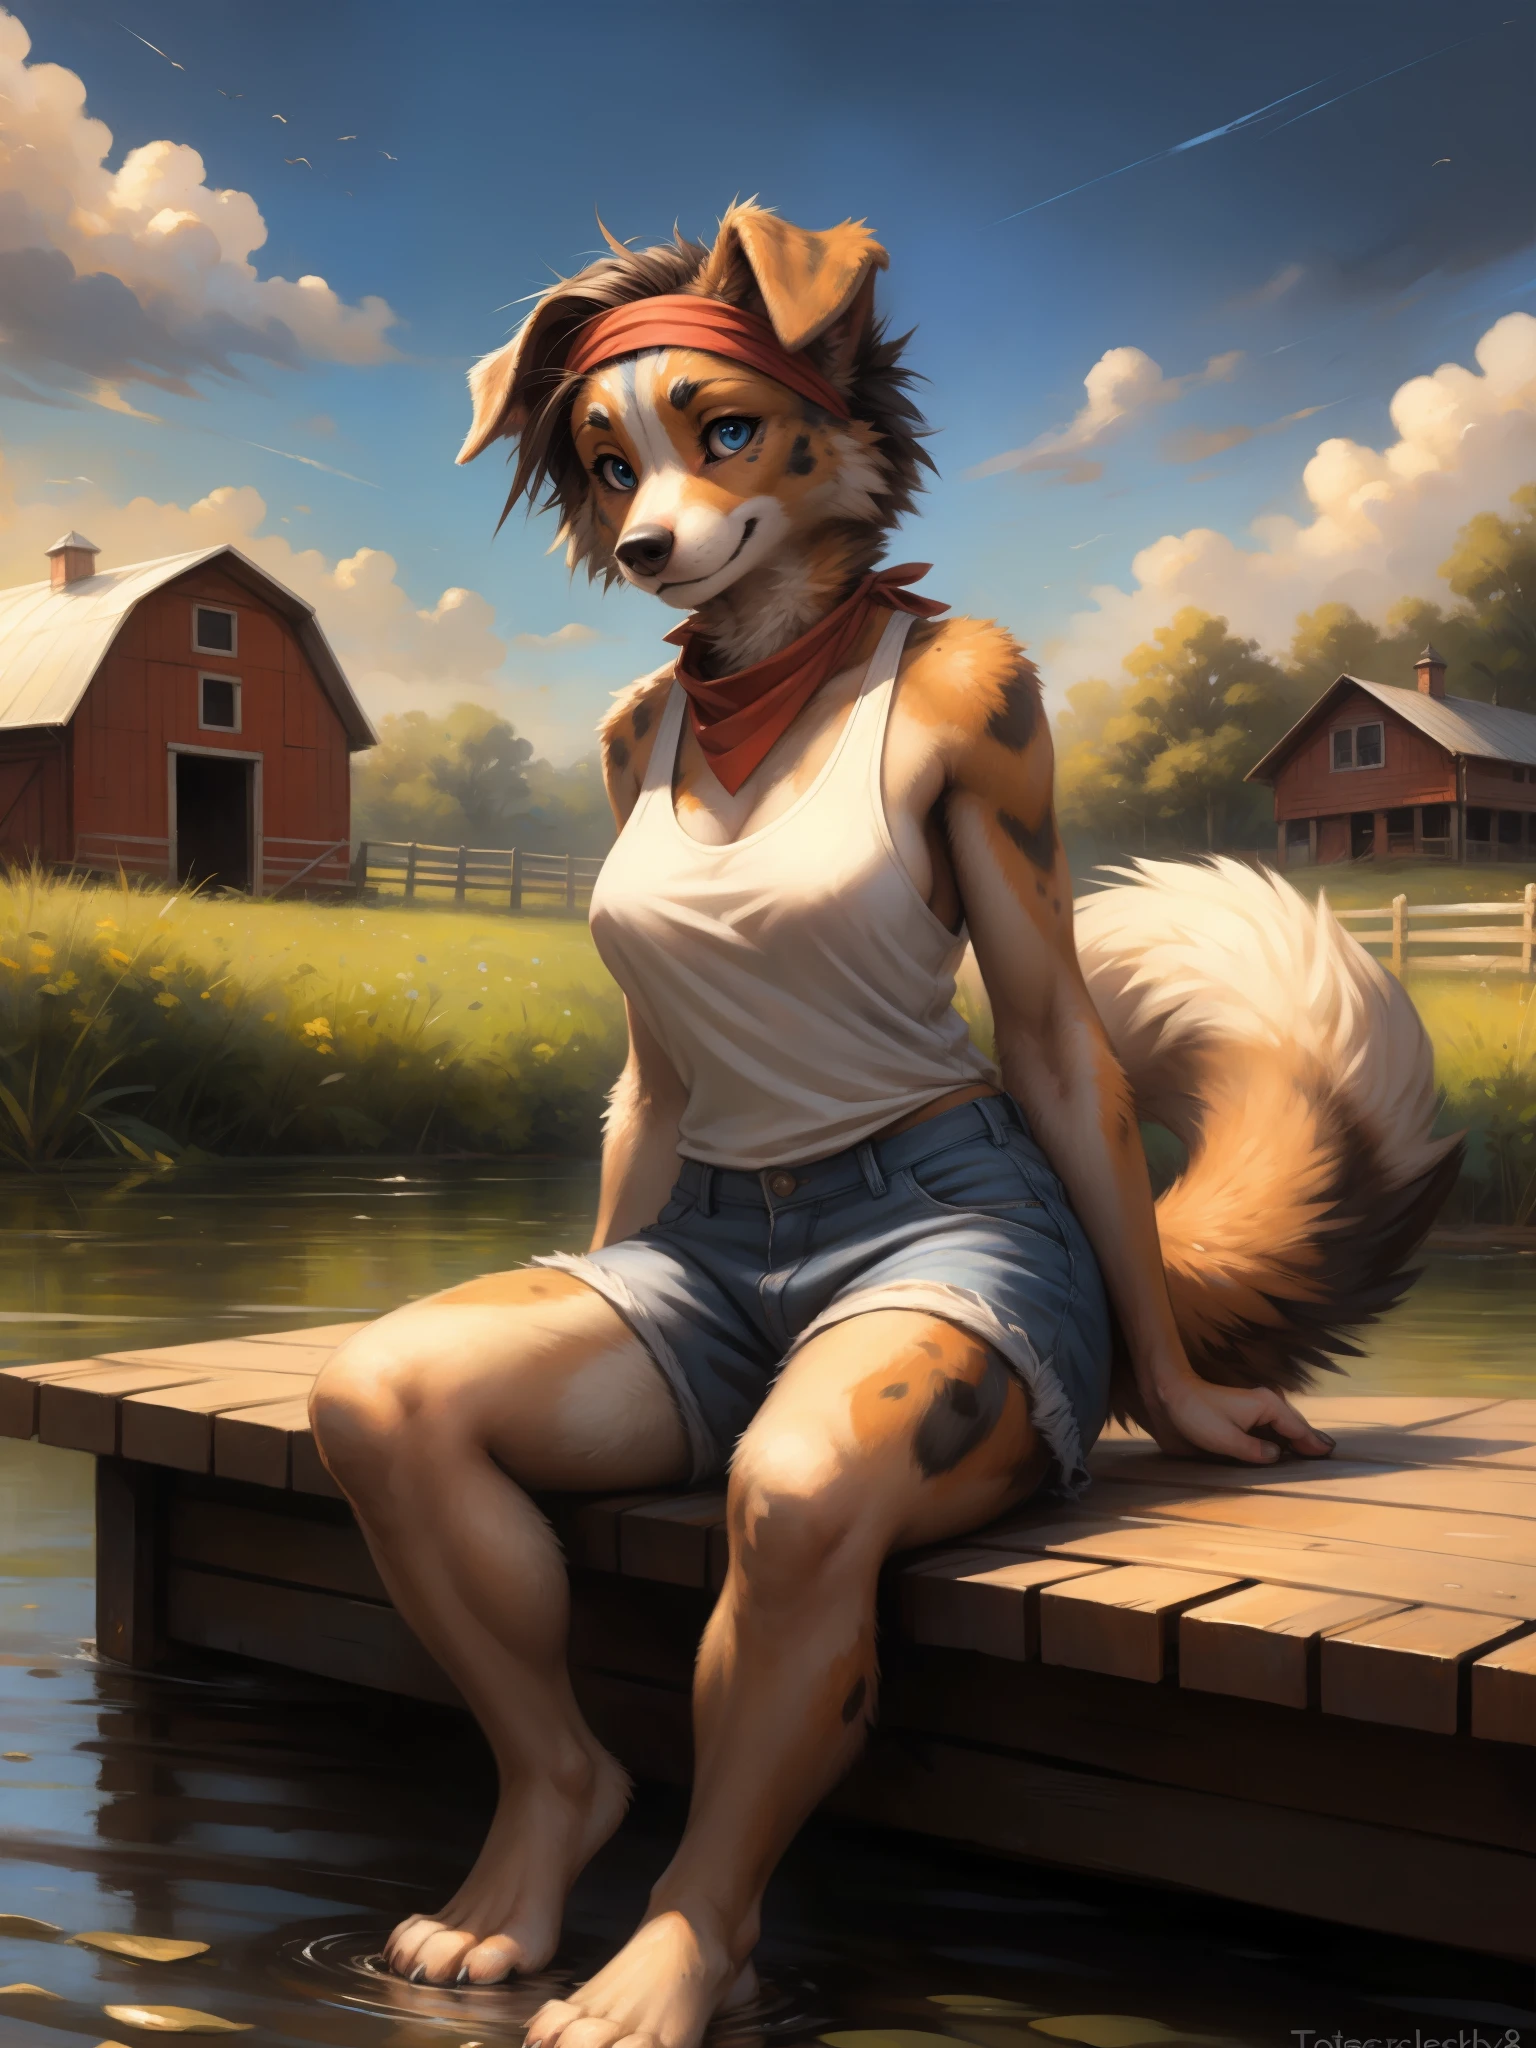 by kenket, by totesfleisch8, (by thebigslick, by silverfox5213:0.8), (by syuro:0.2), an Australian shepherd dog, female, short brown hair, blue eyes, cute snout, black nose, fluffy tail, wearing white tank top, blue jean shorts, red bandana around neck, medium breasts, barefoot, 4 toes, sitting on a dock, toes in the water, a farm in the background